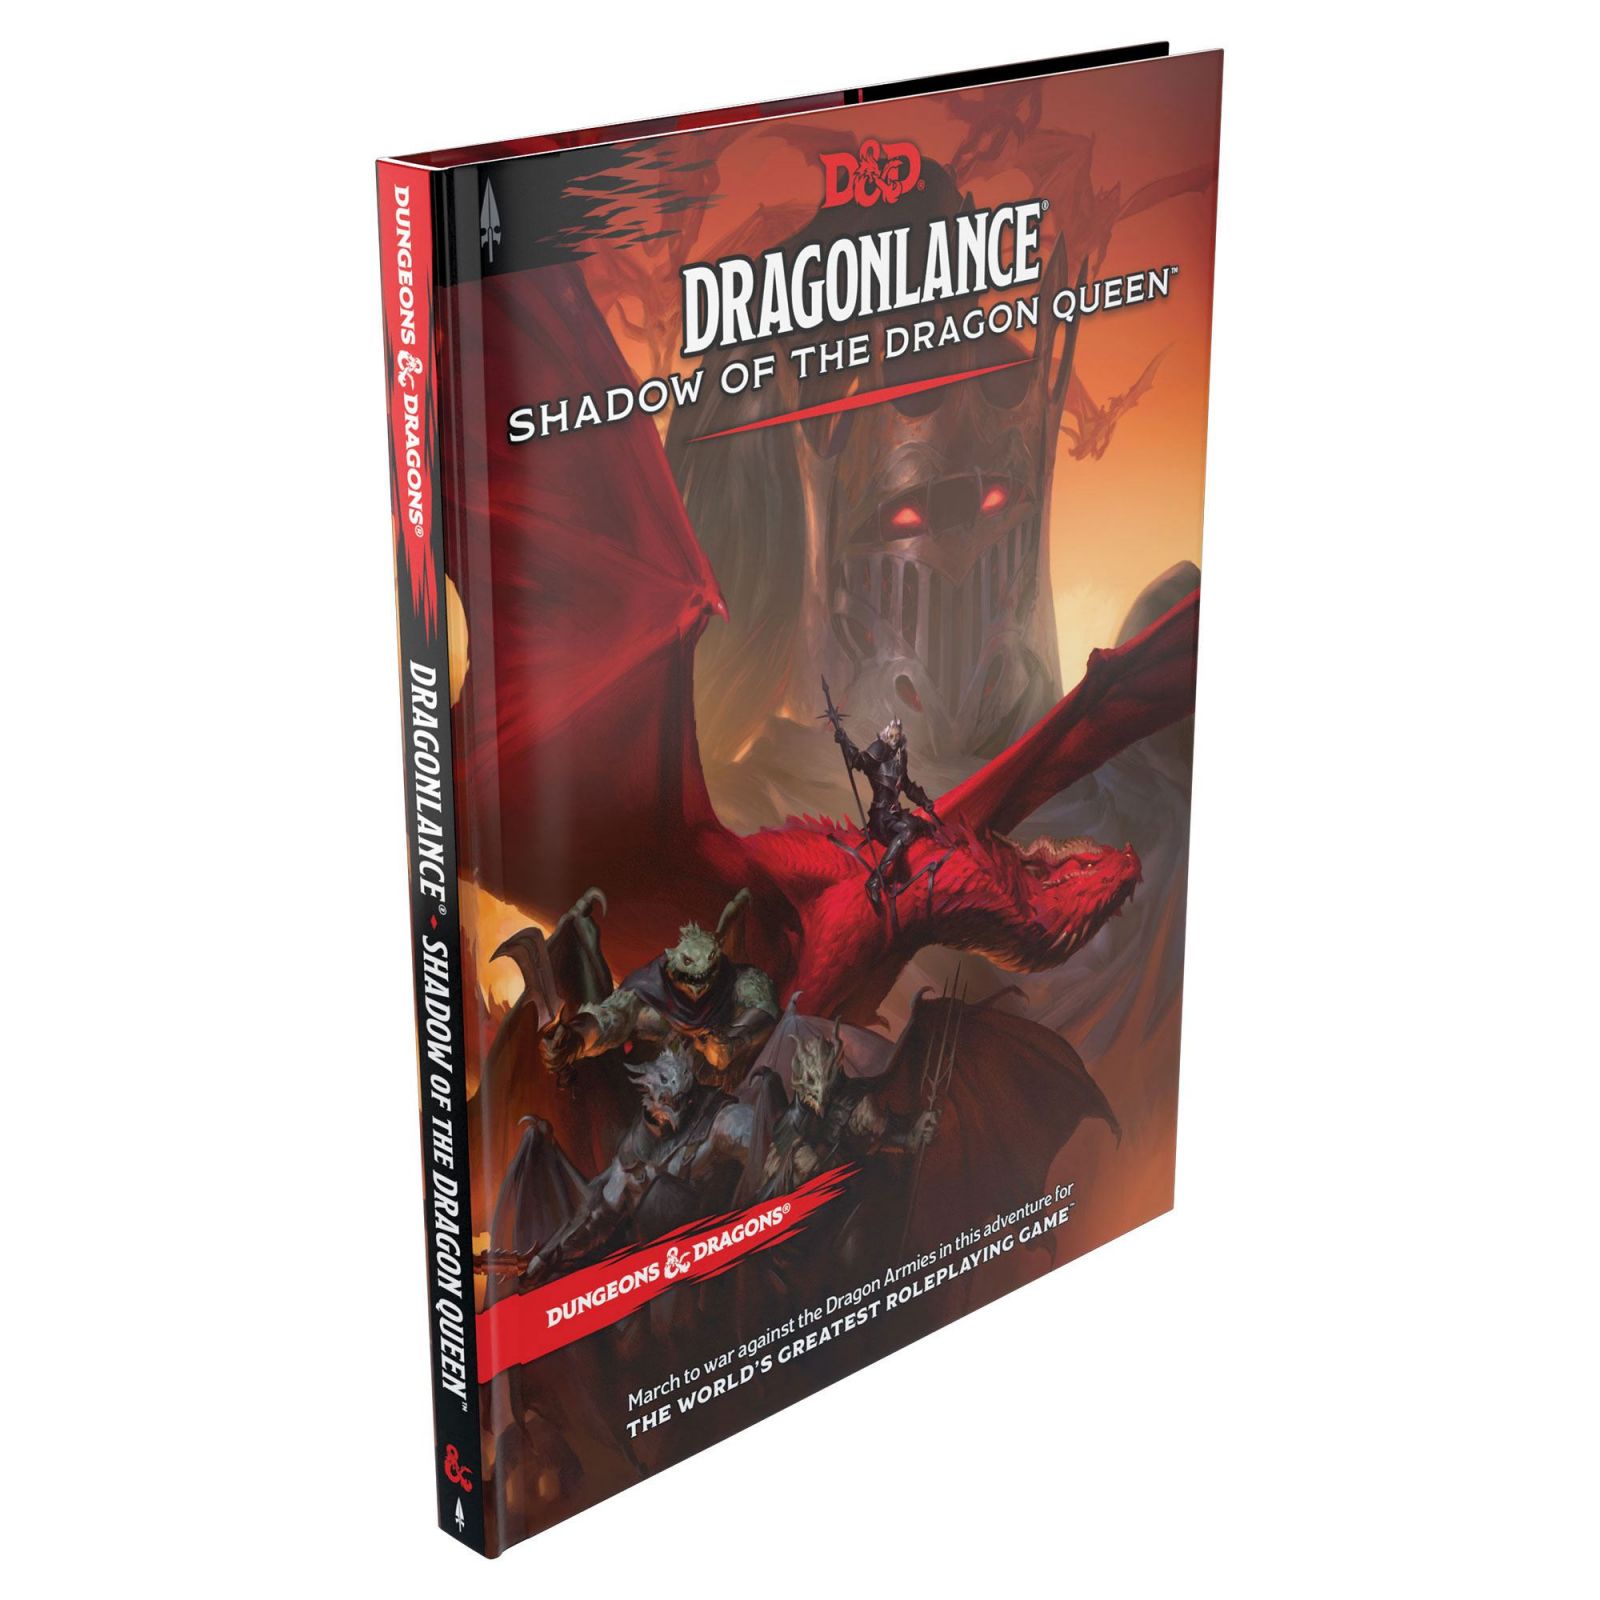 Dungeons & Dragons RPG Adventure Dragonlance: Shadow of the Dragon Queen english Wizards of the Coast